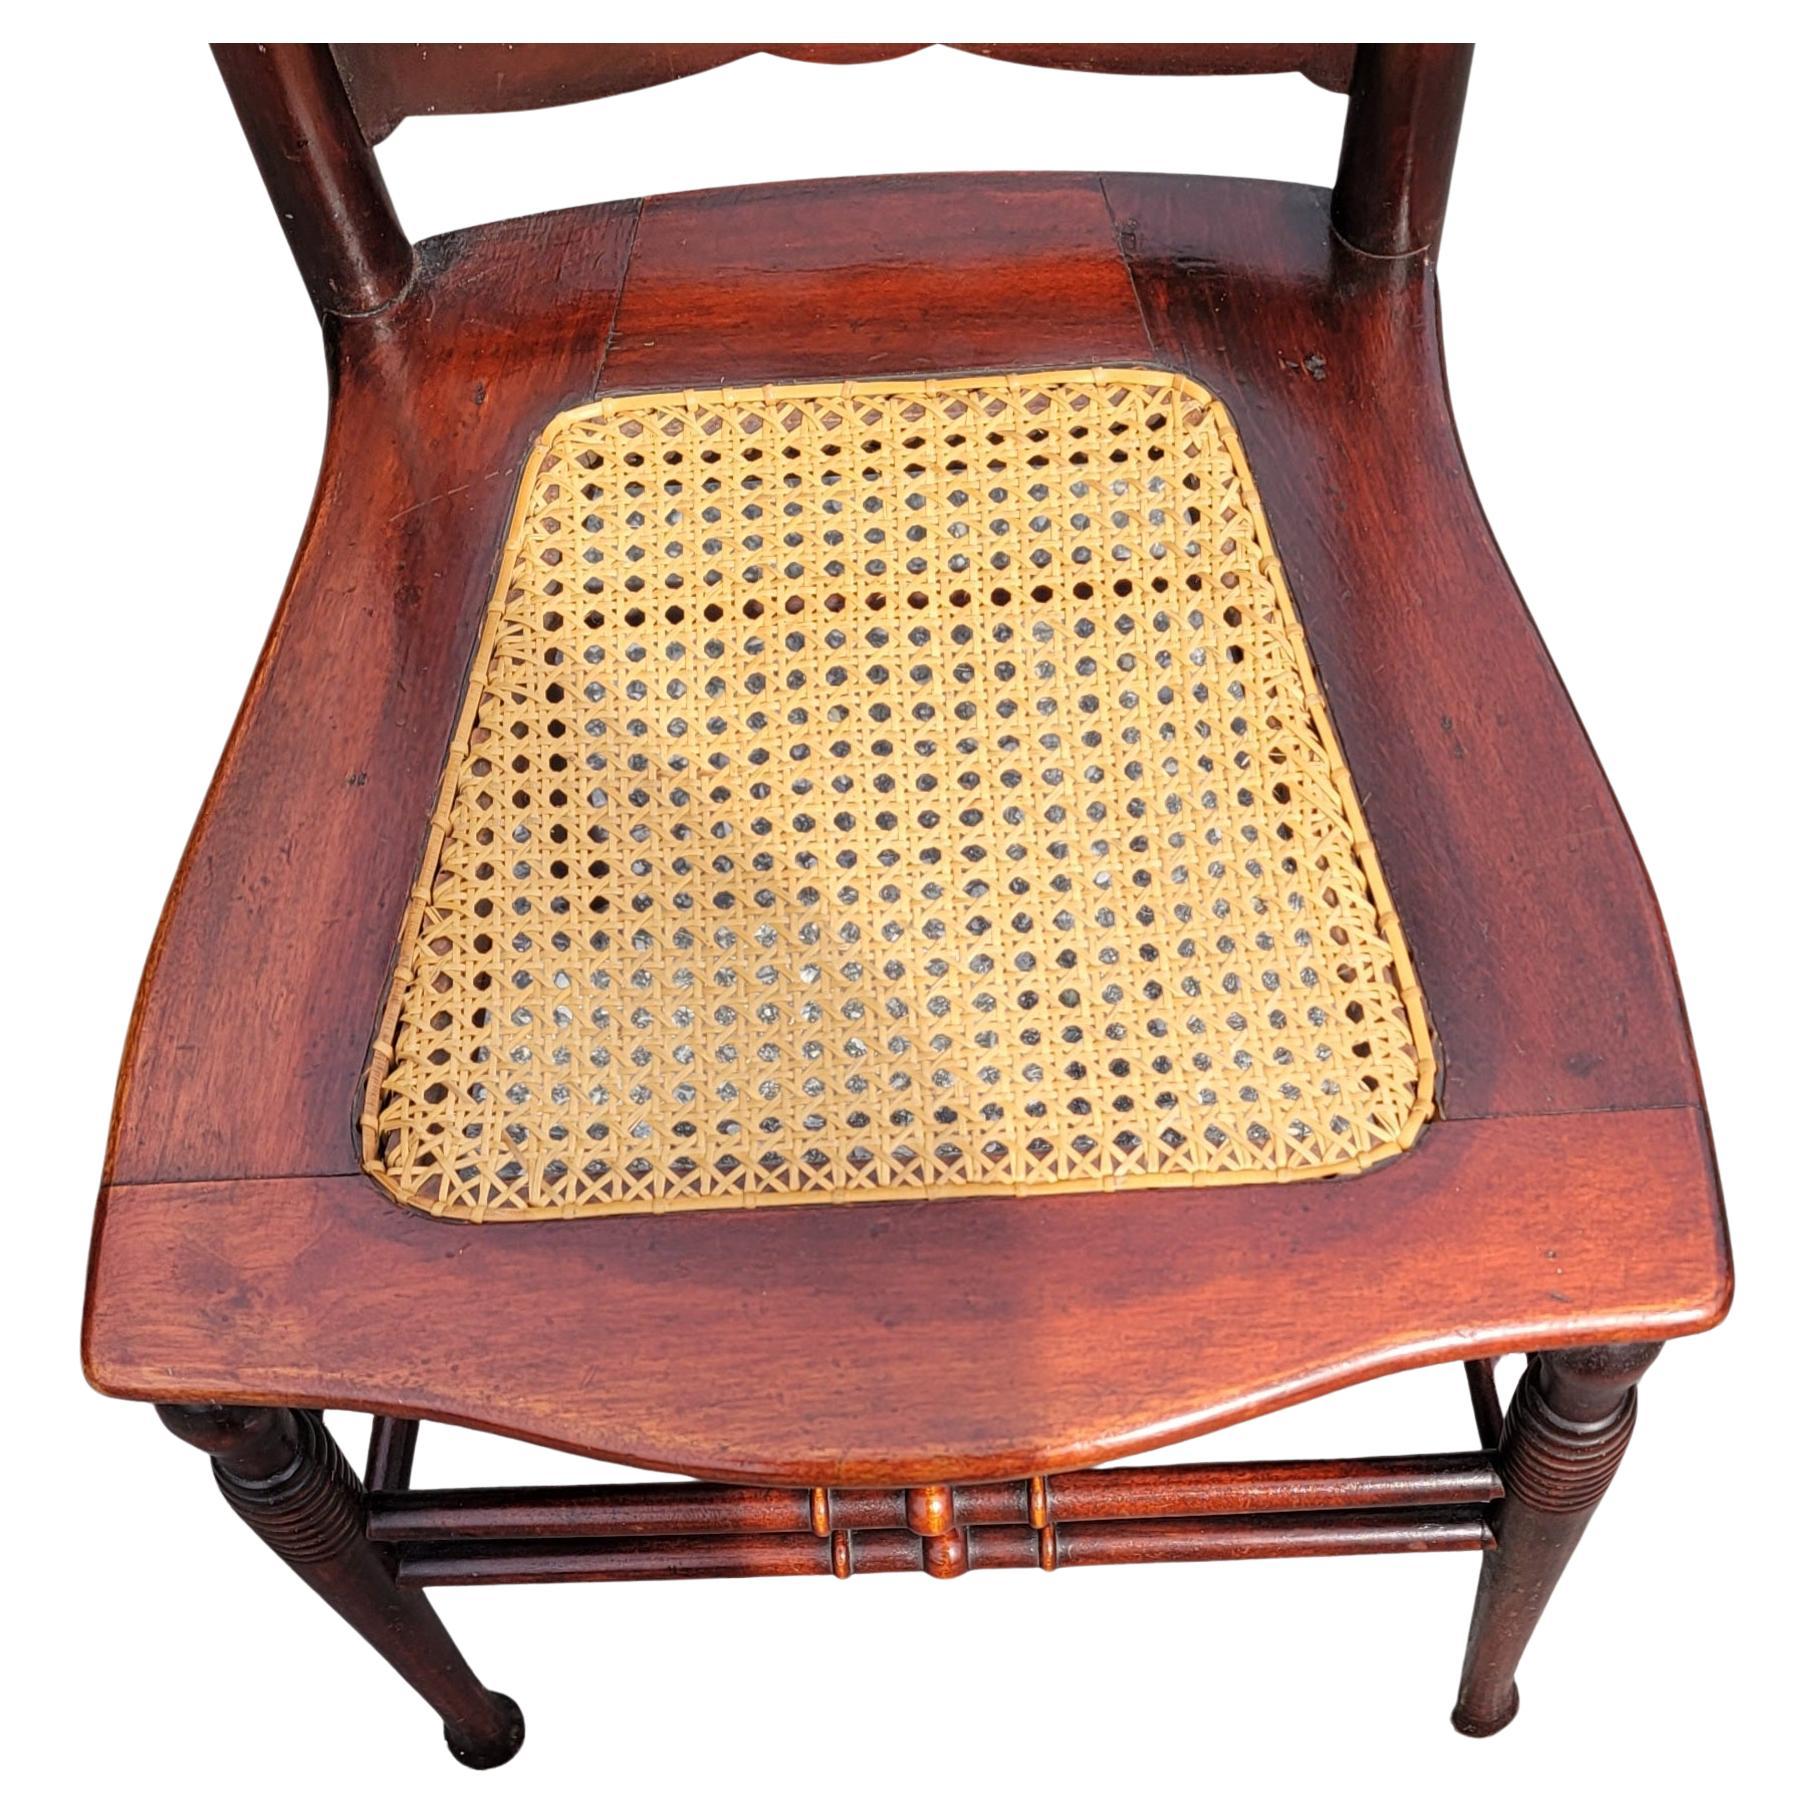 Refinished Early American Empire Mahogany and Cane Seat Chair For Sale 2